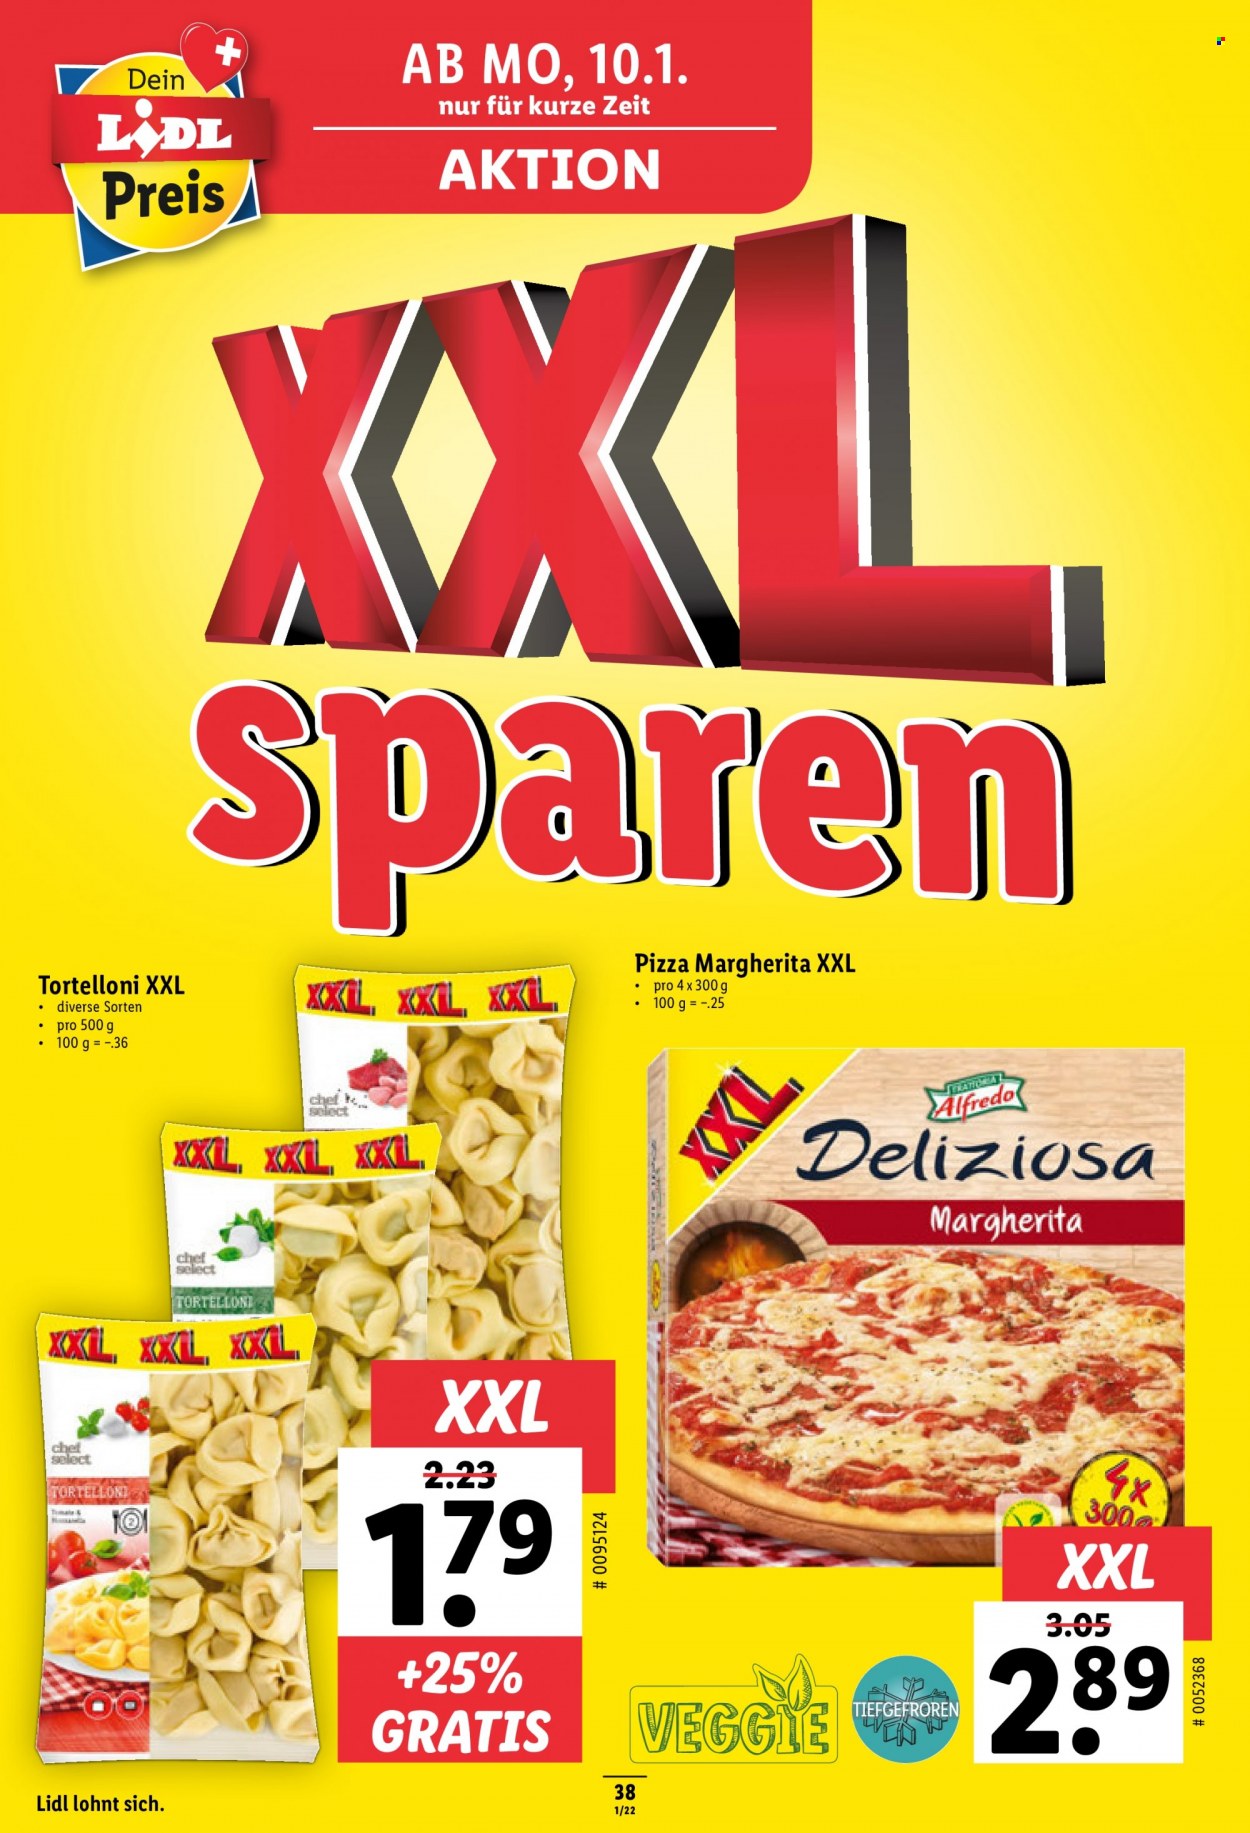 Catalogue Lidl - 6.1.2022 - 12.1.2022. Page 38.